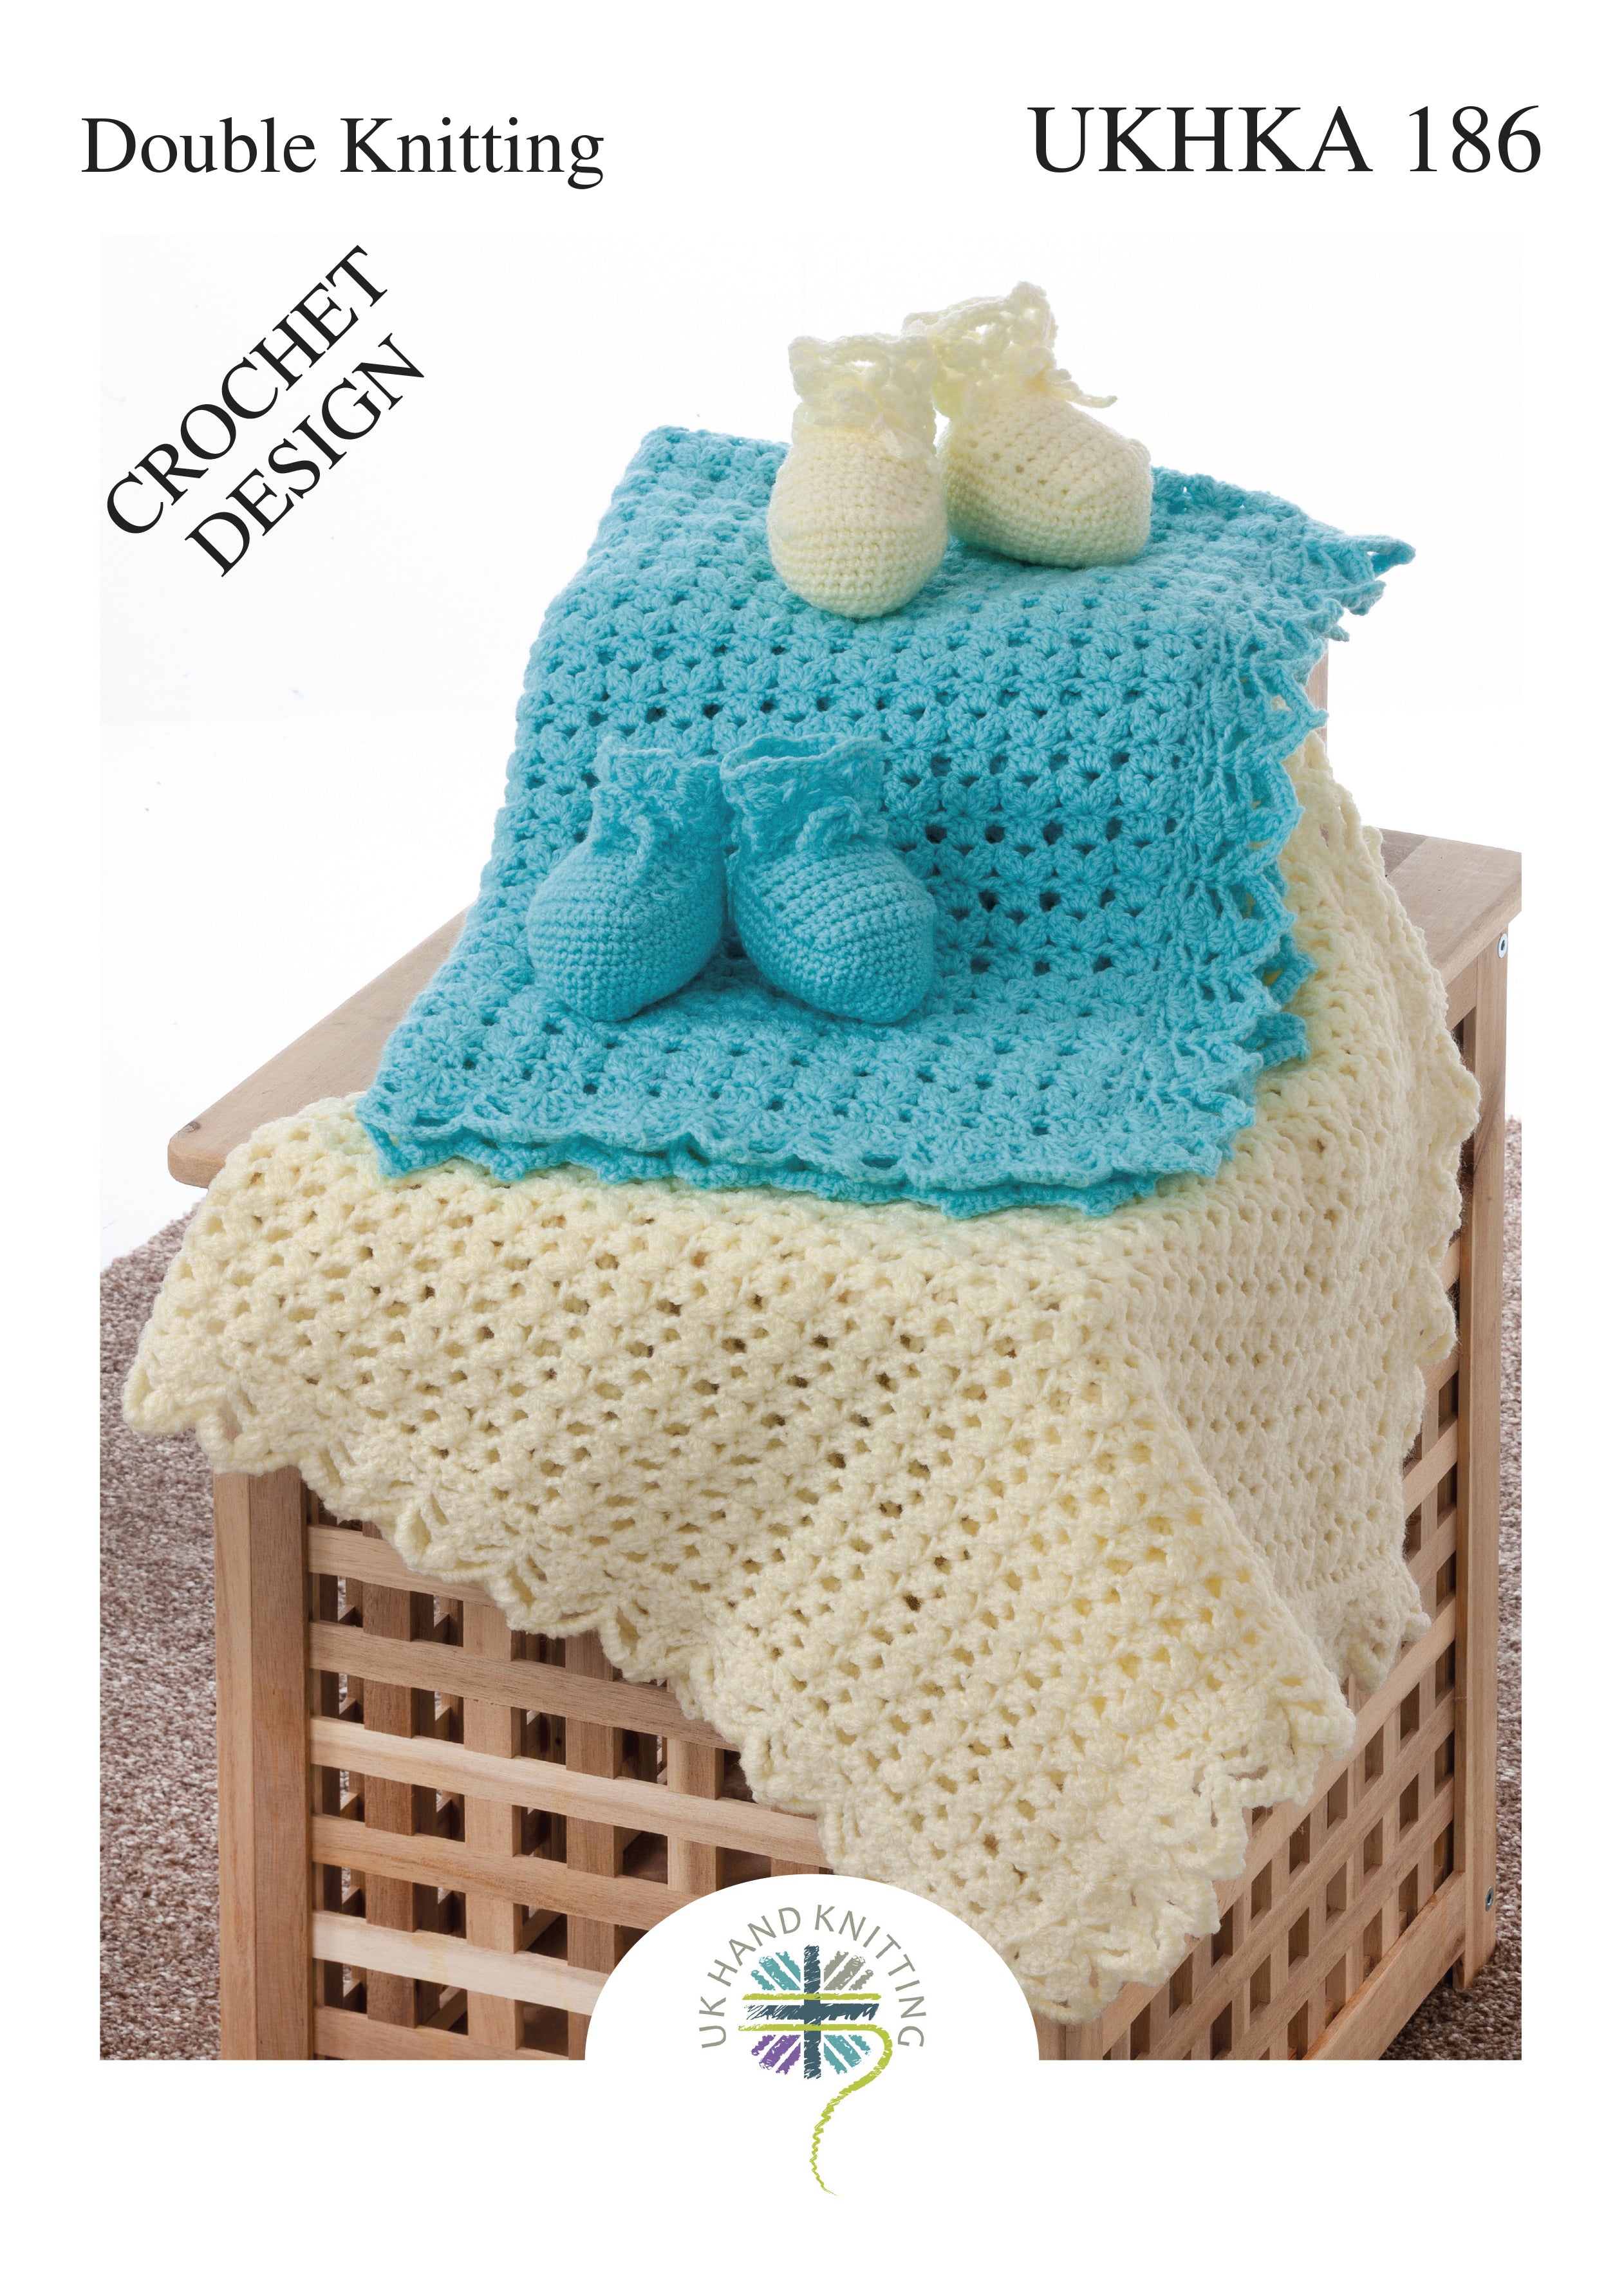 UKHKA 186 Crochet Pattern Baby Blanket and Booties - Double Knitting